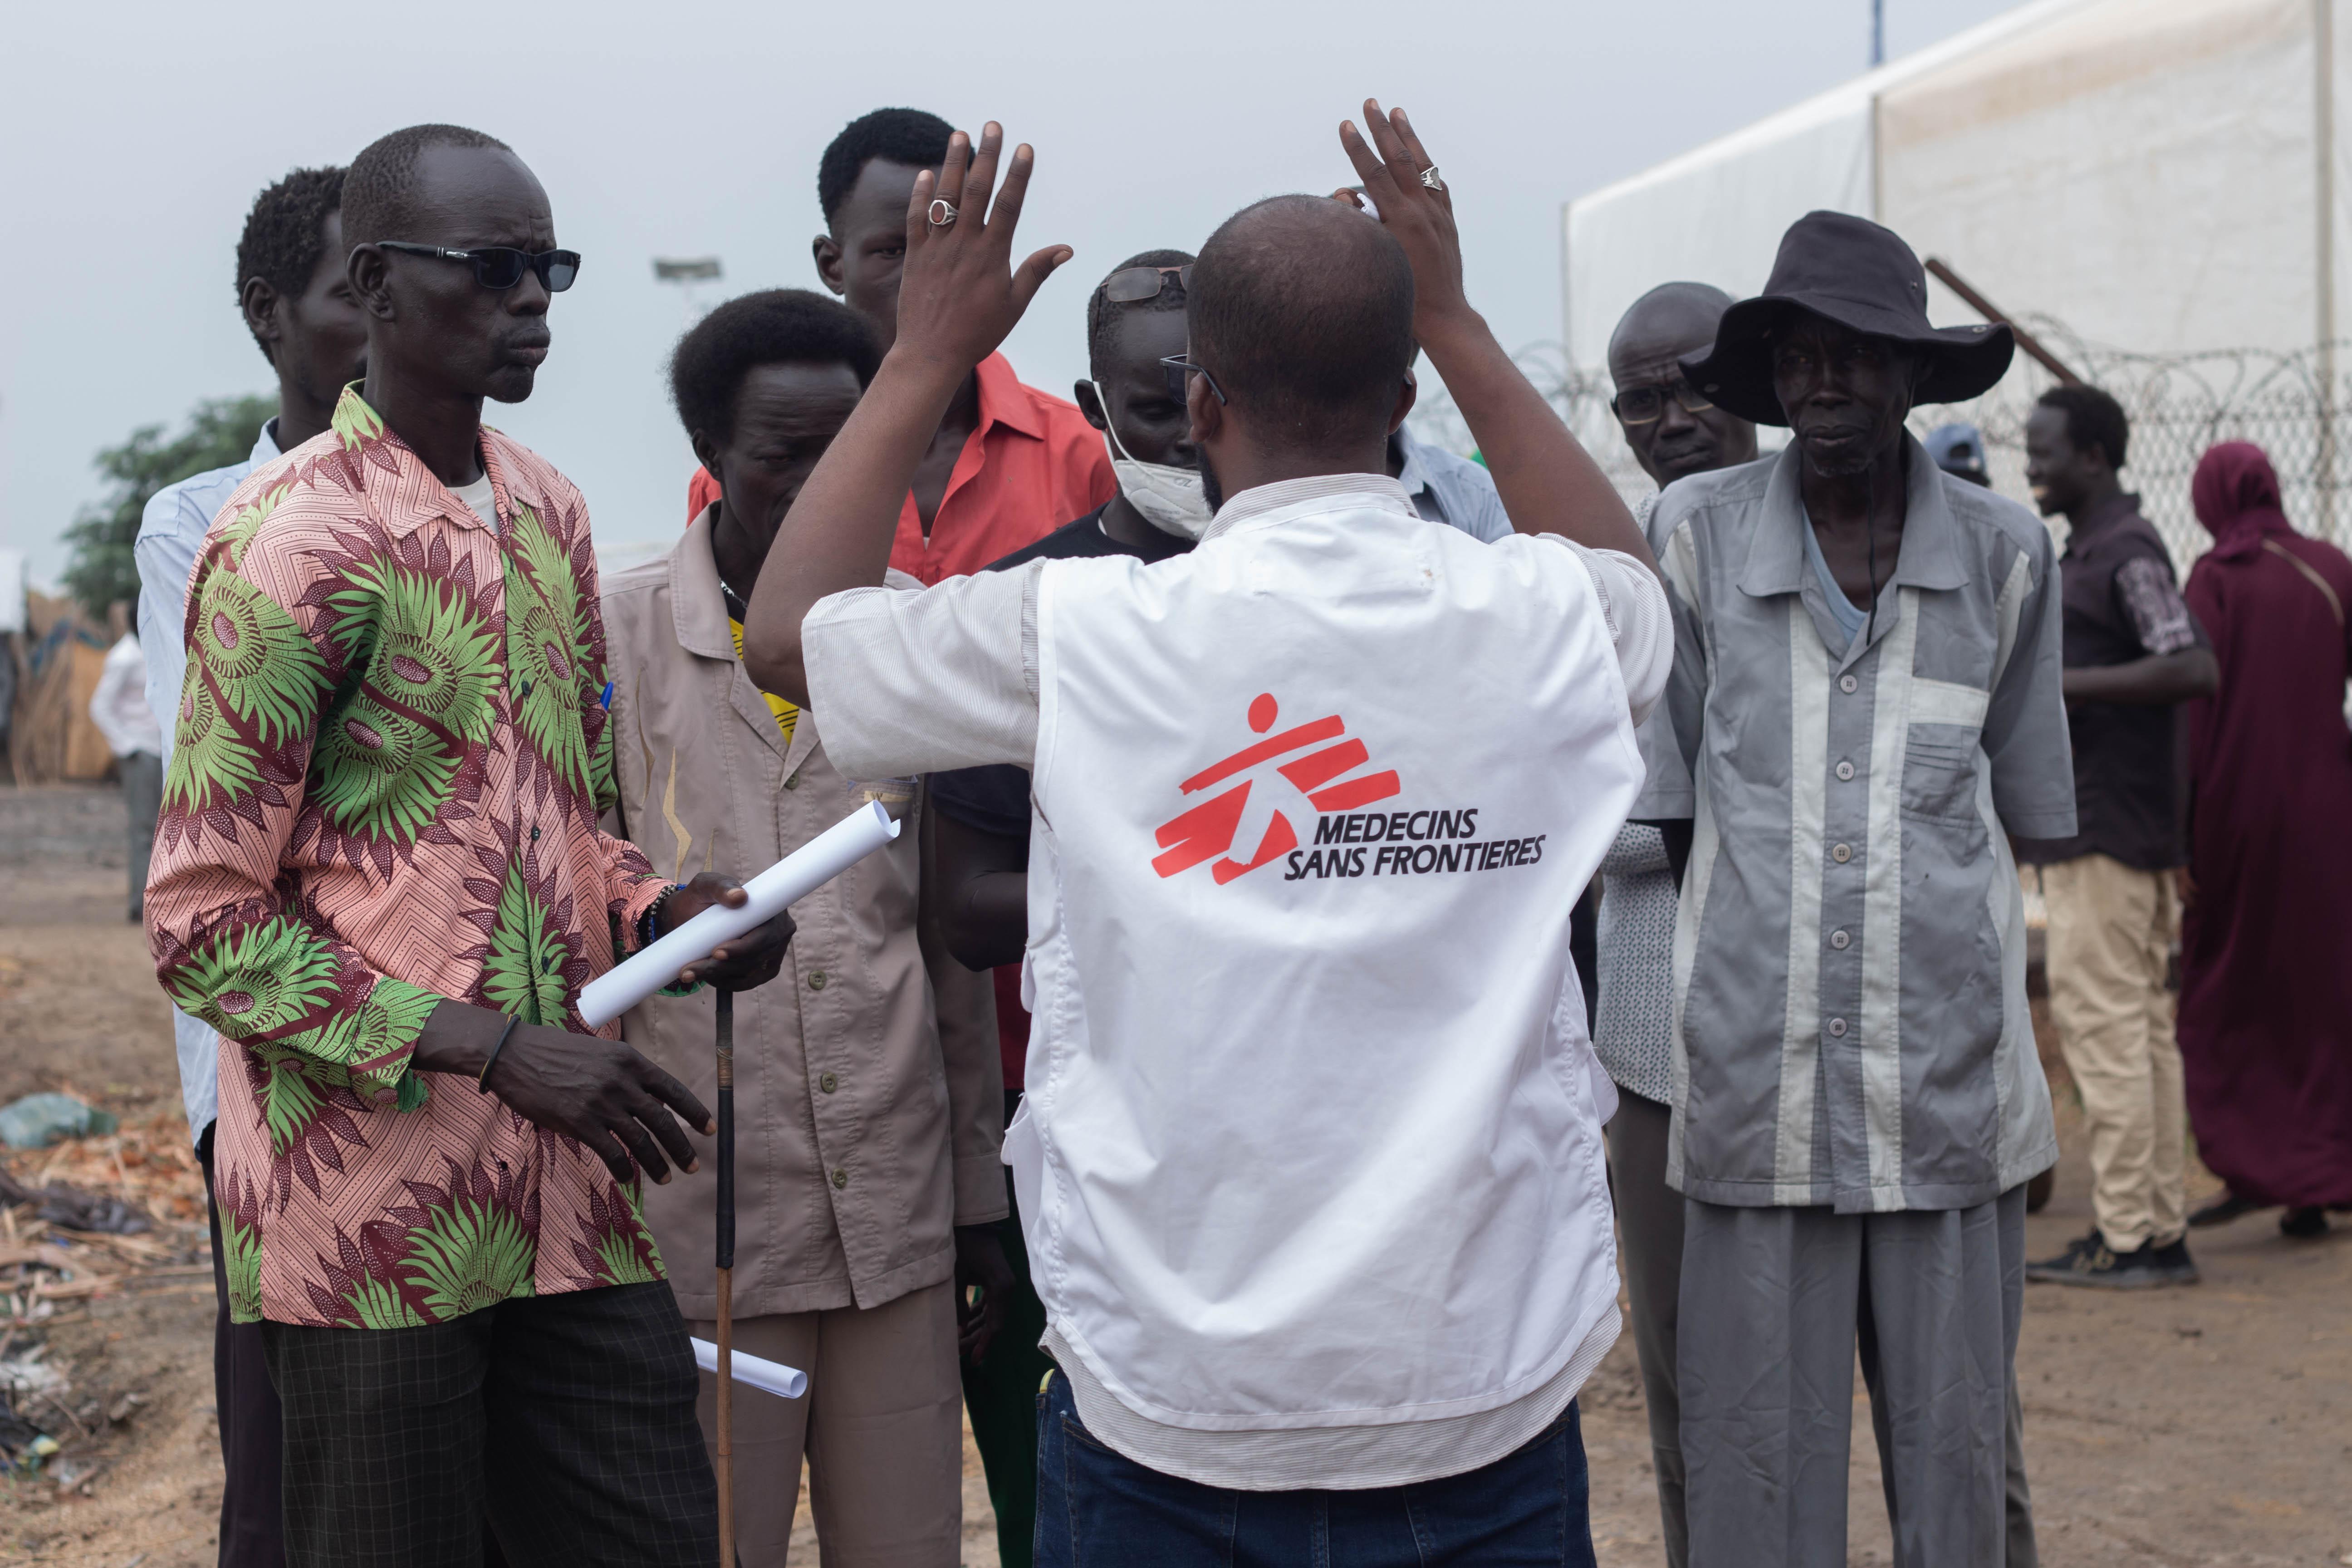 MSF staff organizing a measles vaccination campaign with community leaders of the Um Sangour camp, White Nile state, Sudan